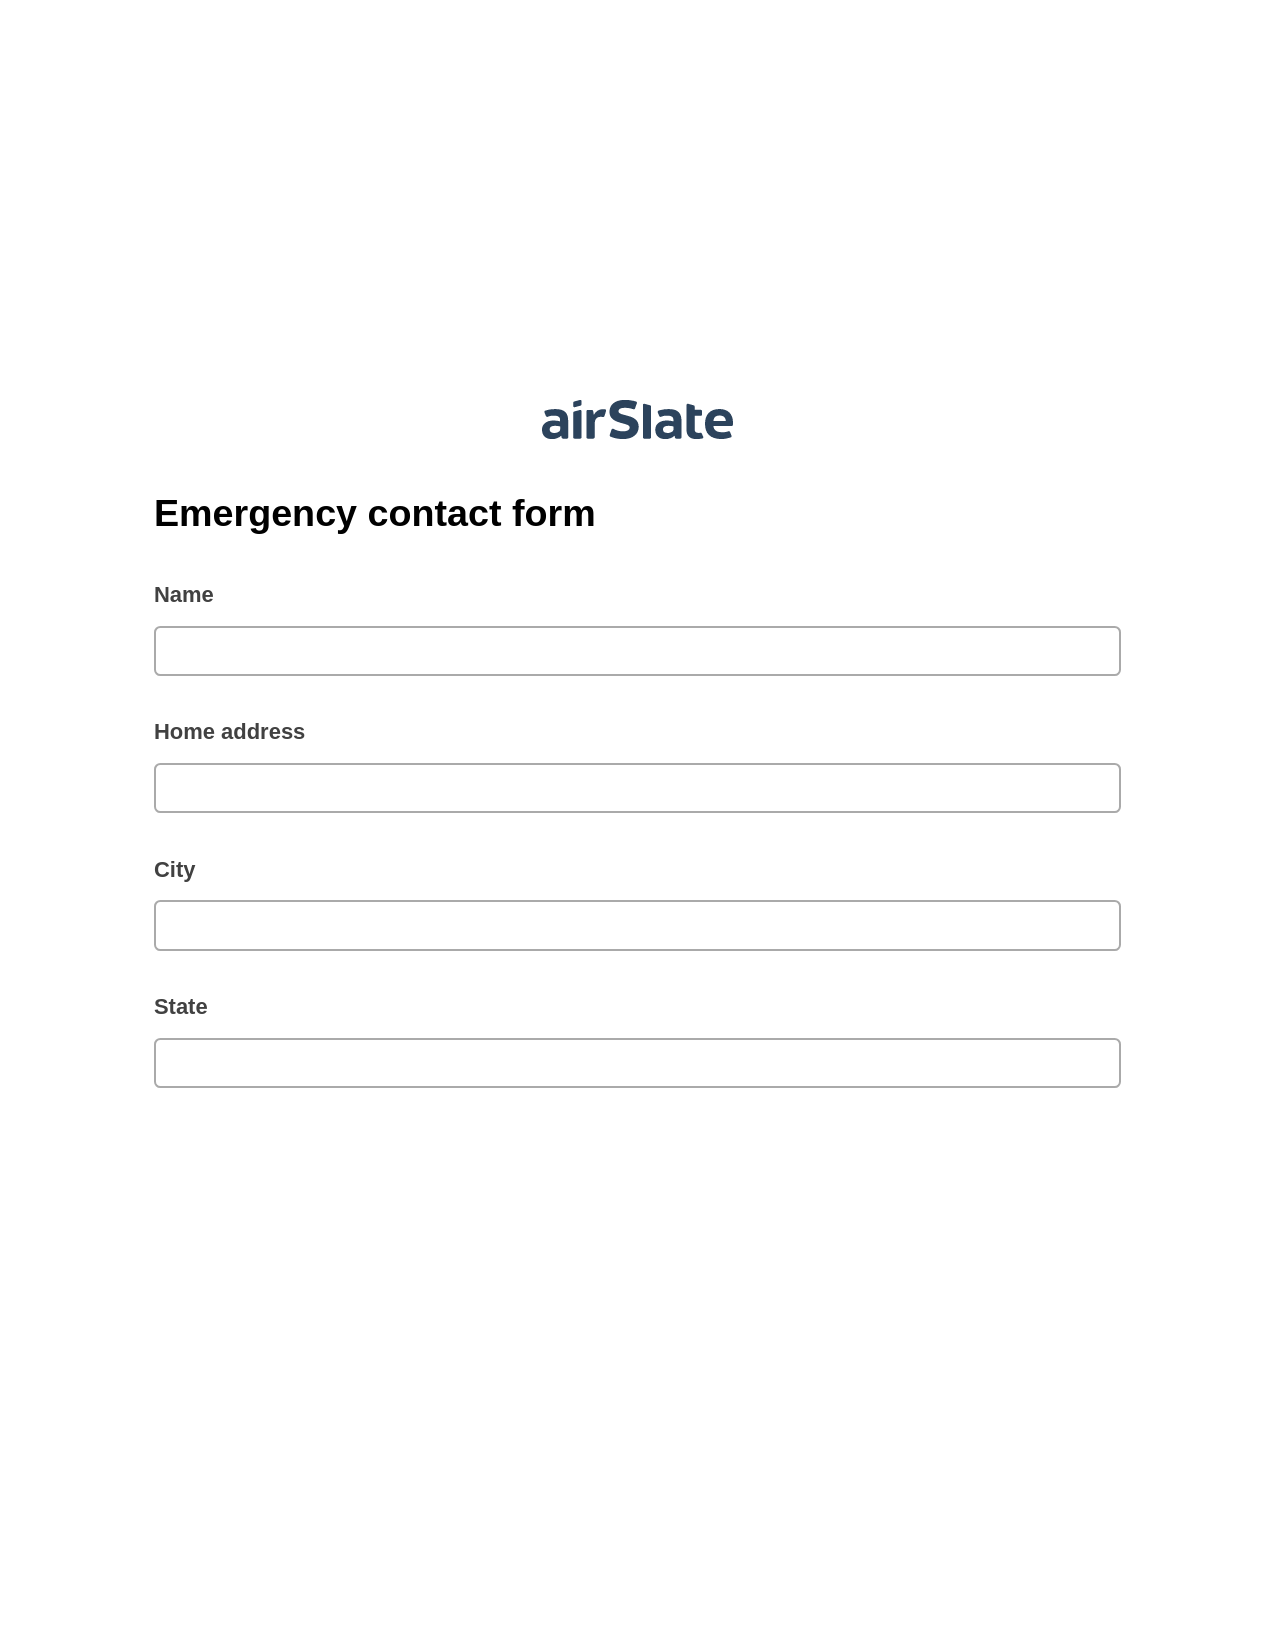 Multirole Emergency contact form Pre-fill Slate from MS Dynamics 365 Records Bot, Jira Bot, Export to NetSuite Record Bot